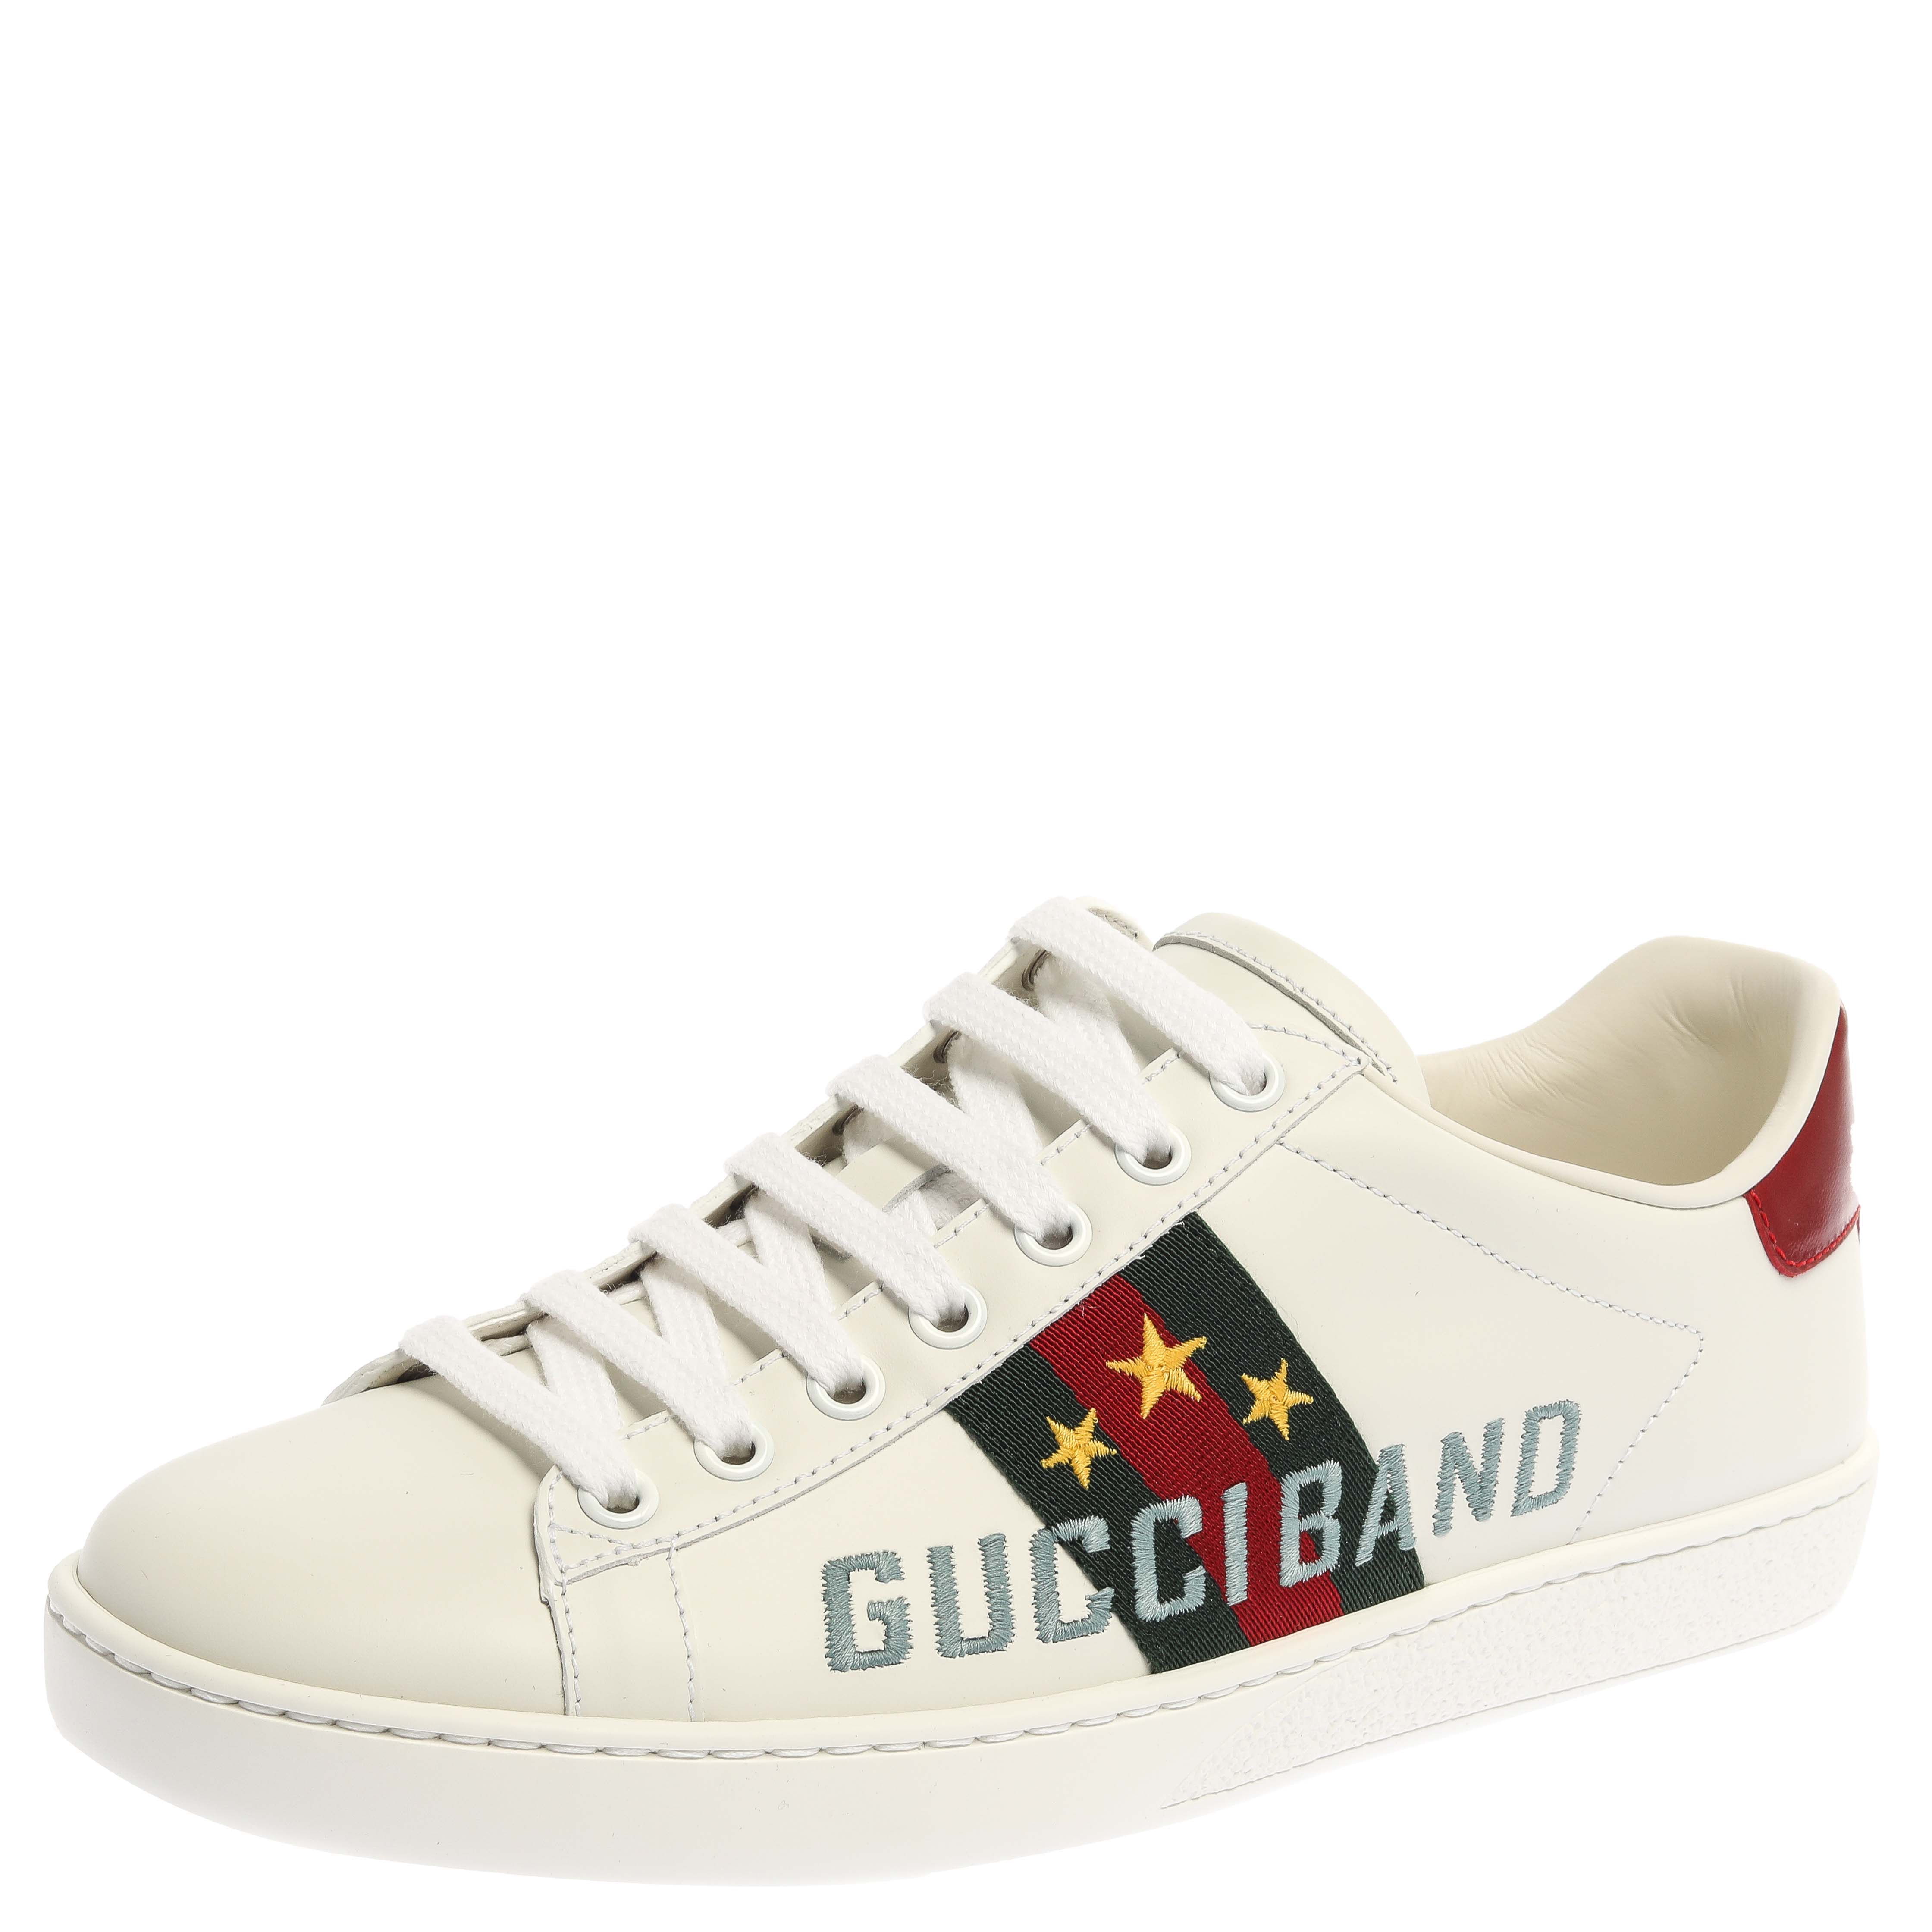  Gucci White Leather Embroidery Rainbow Patch Low Top Sneaker Size 37